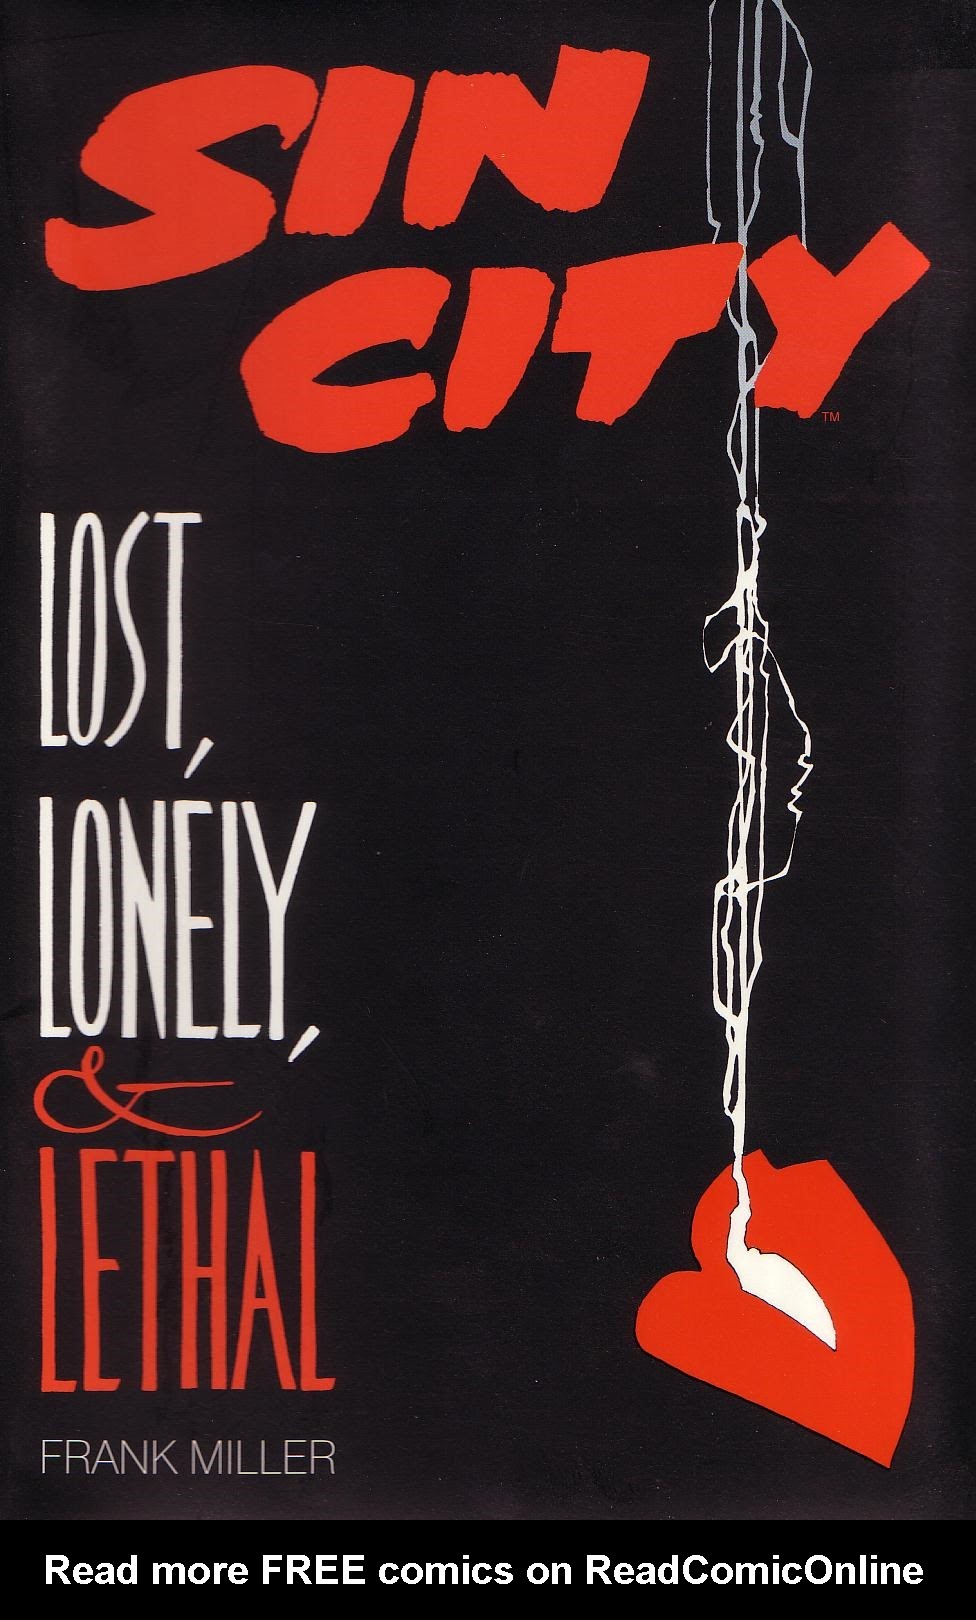 Read online Sin City: Lost, Lonely, & Lethal comic -  Issue # Full - 1